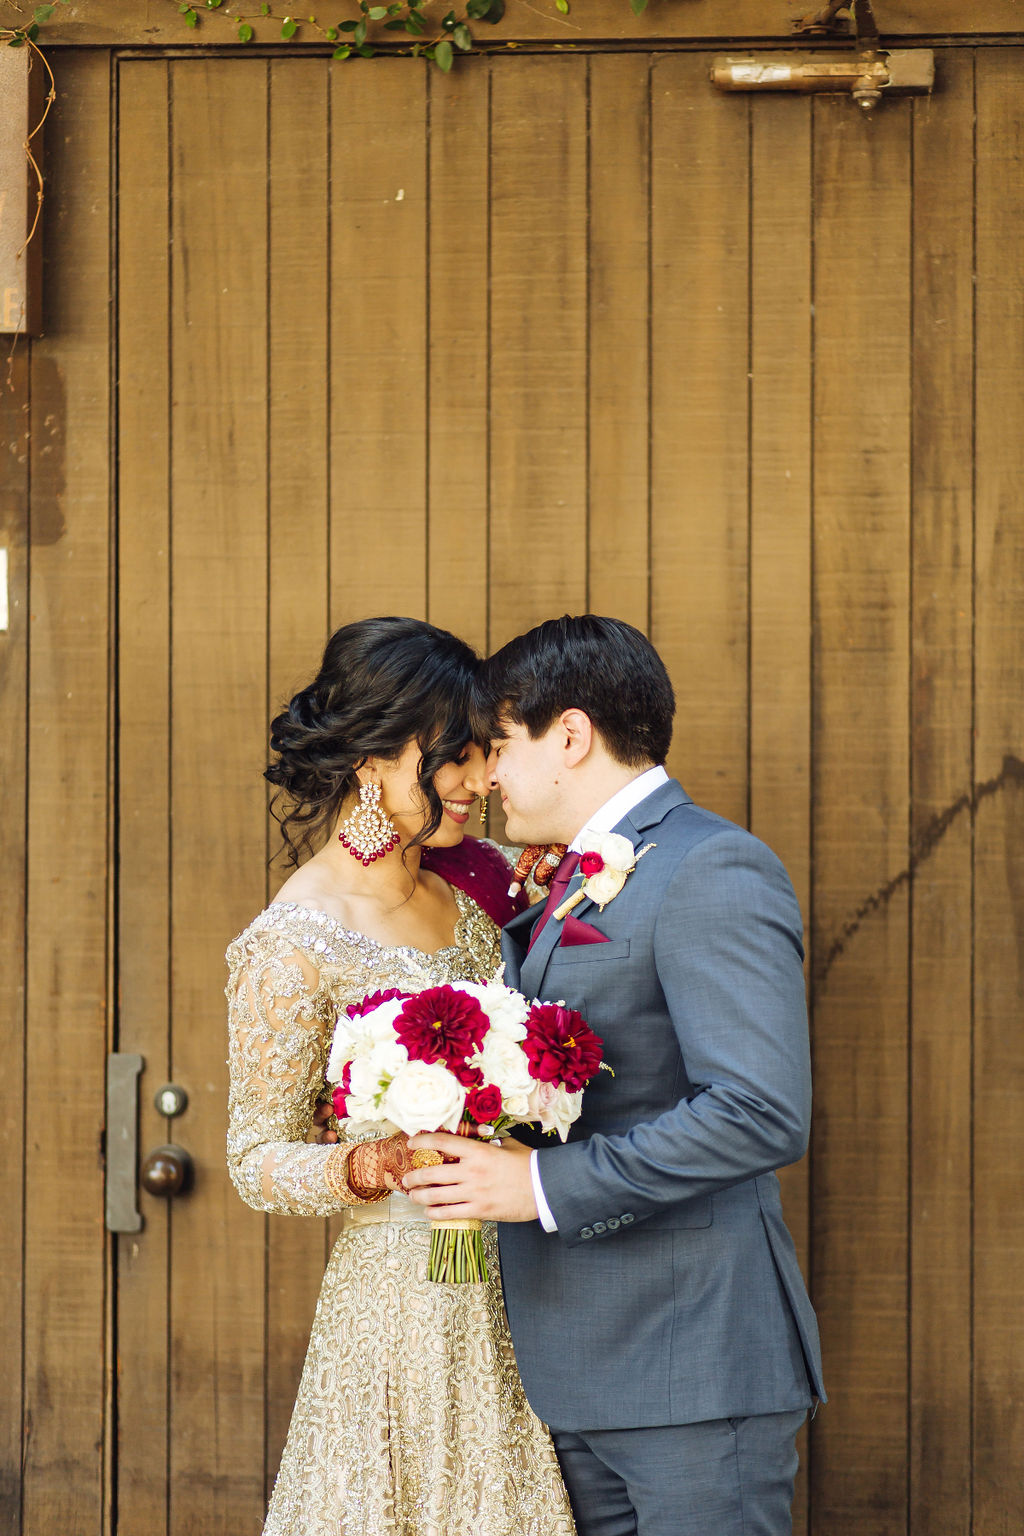 bride wearing embellished golden wedding saree and groom in dark grey suit with maroon at Los Angeles River and Garden Center